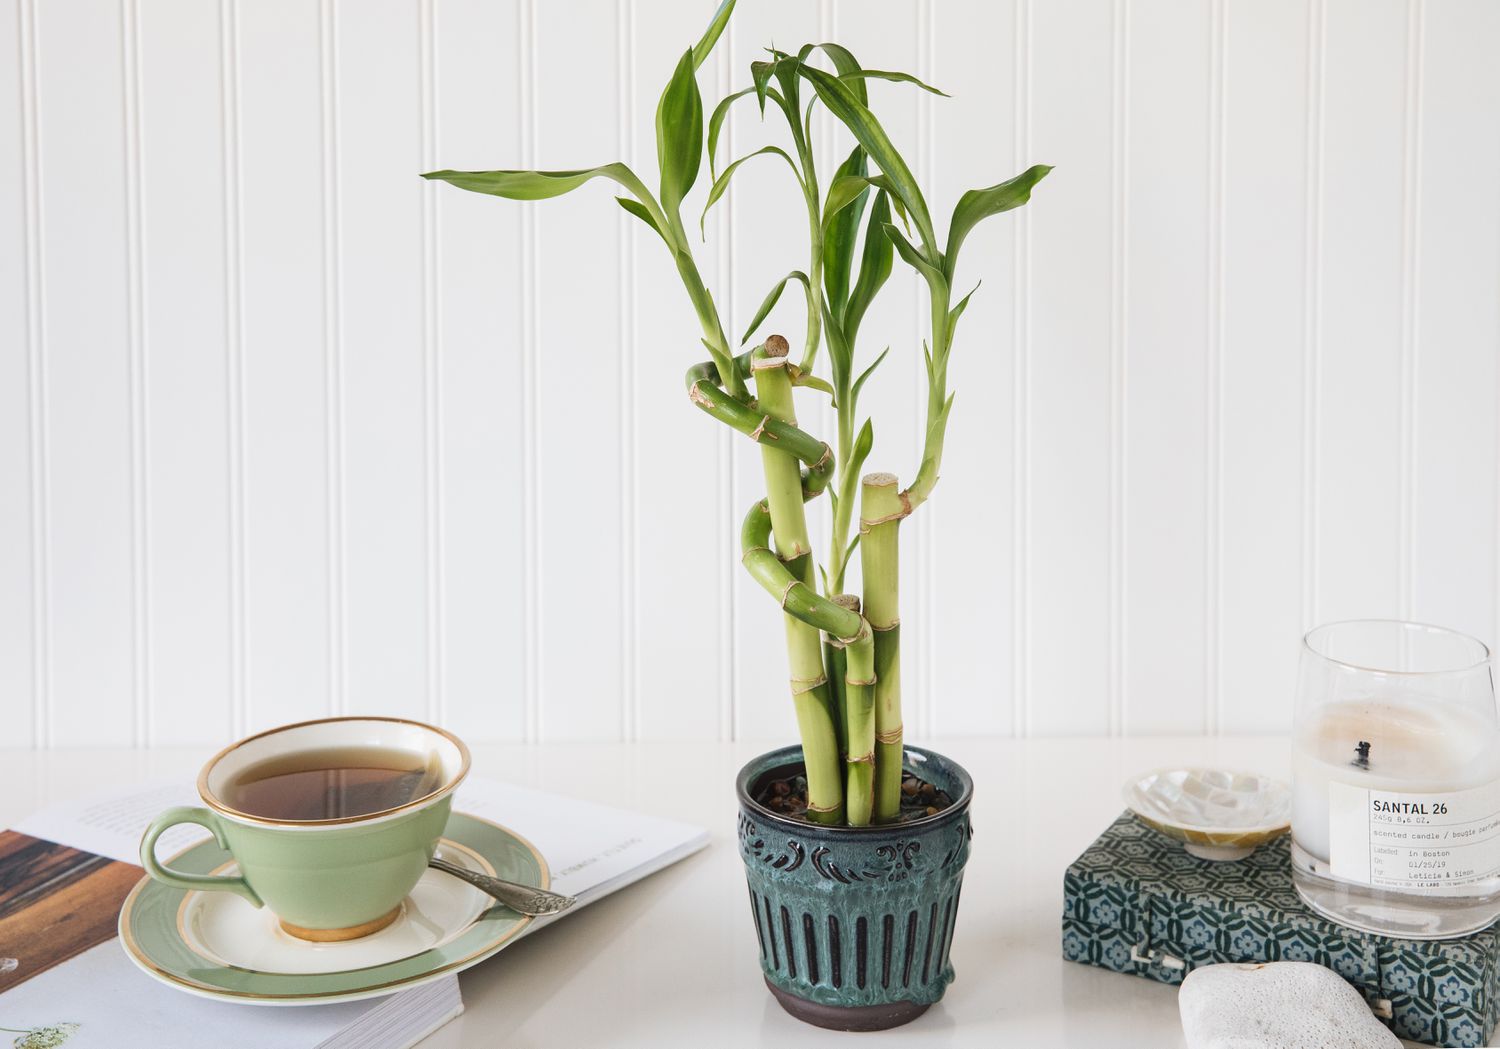 How To Take Care Of A Lucky Bamboo Plant